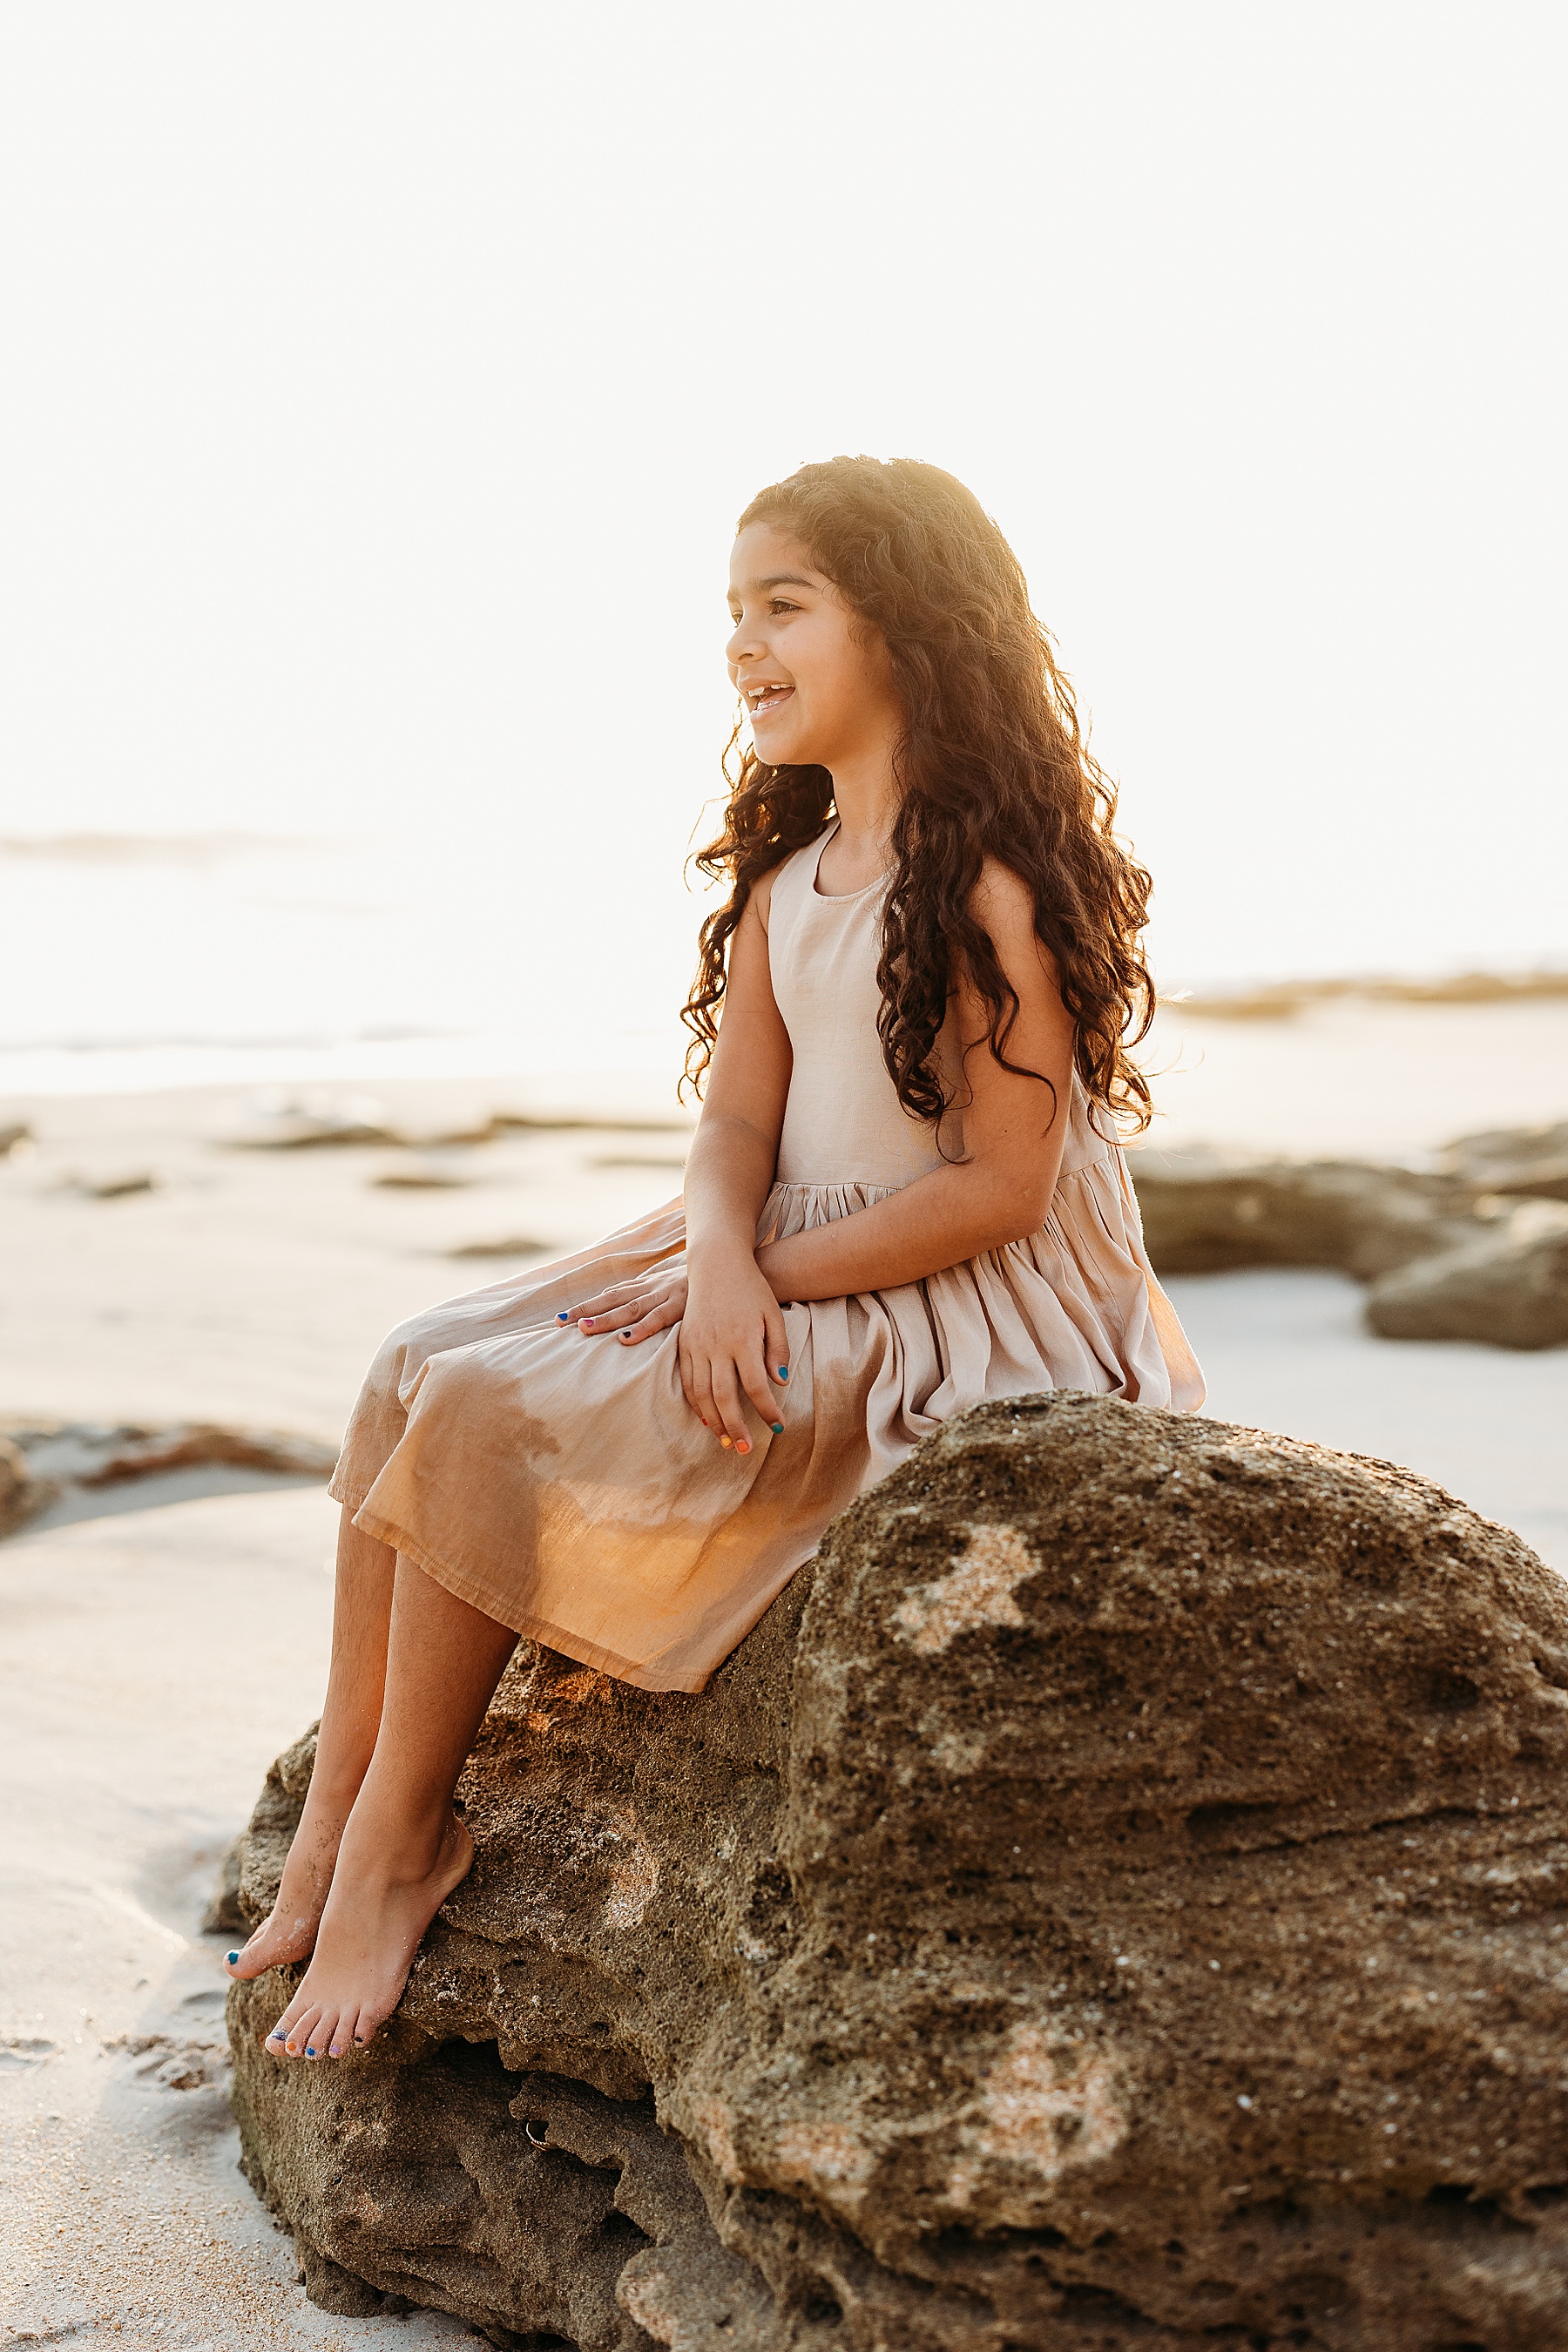 little girl sitting on a rock at the beach at sunrise wearing brown dress holding a stuffed animal fox